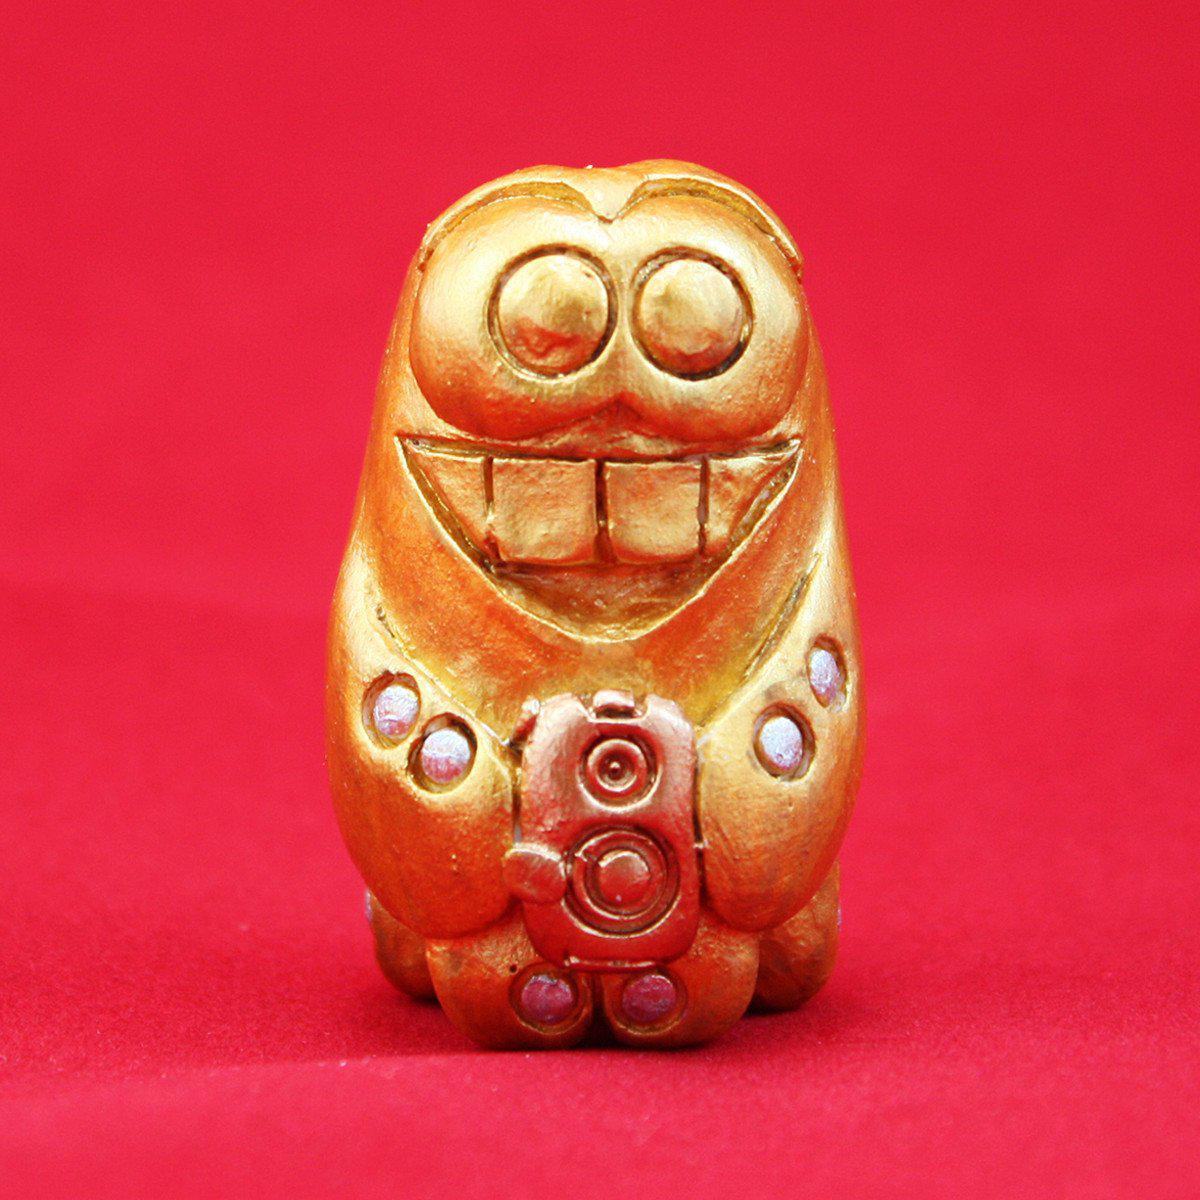 Art Toys - Chef Tako Say Cheese 1.75" Resin Figure (Gold Edition)